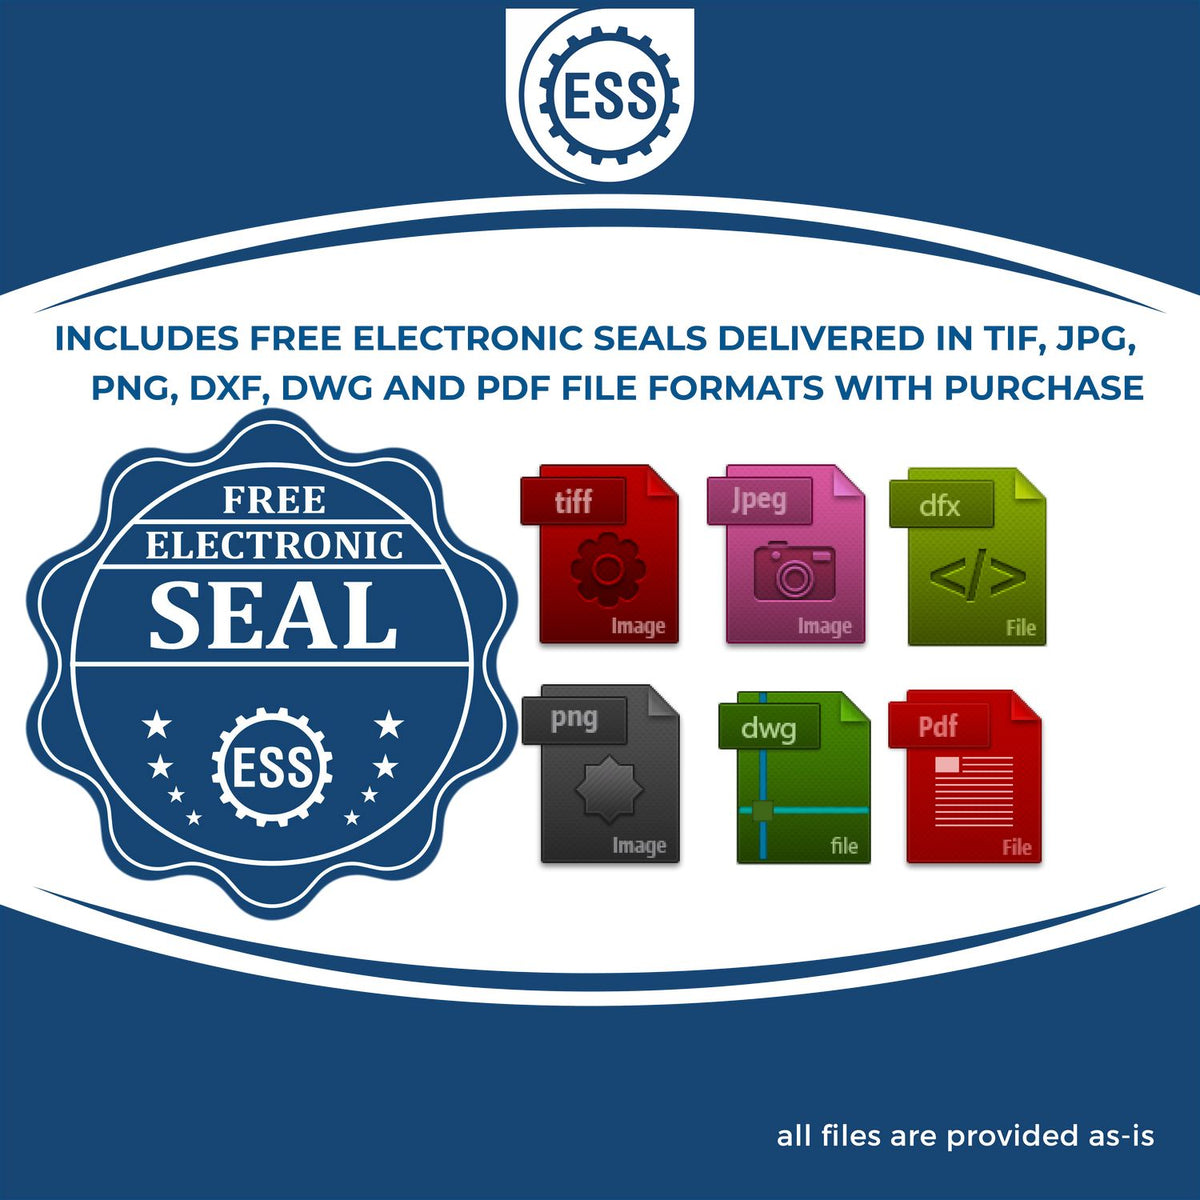 An infographic for the free electronic seal for the Slim Pre-Inked Minnesota Land Surveyor Seal Stamp illustrating the different file type icons such as DXF, DWG, TIF, JPG and PNG.